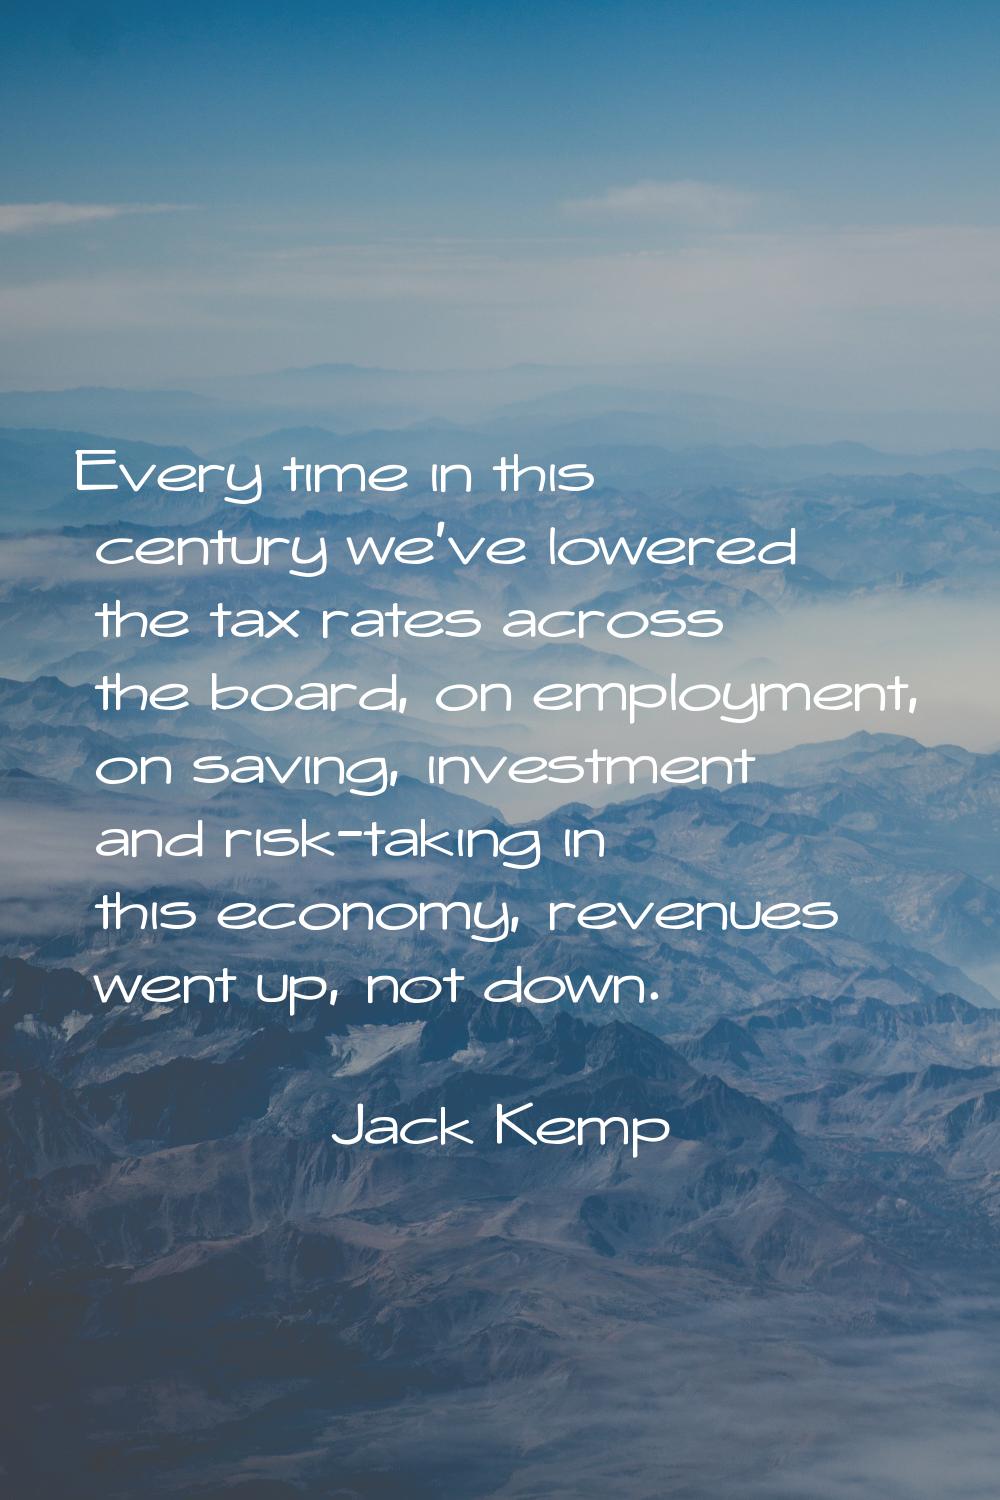 Every time in this century we've lowered the tax rates across the board, on employment, on saving, 